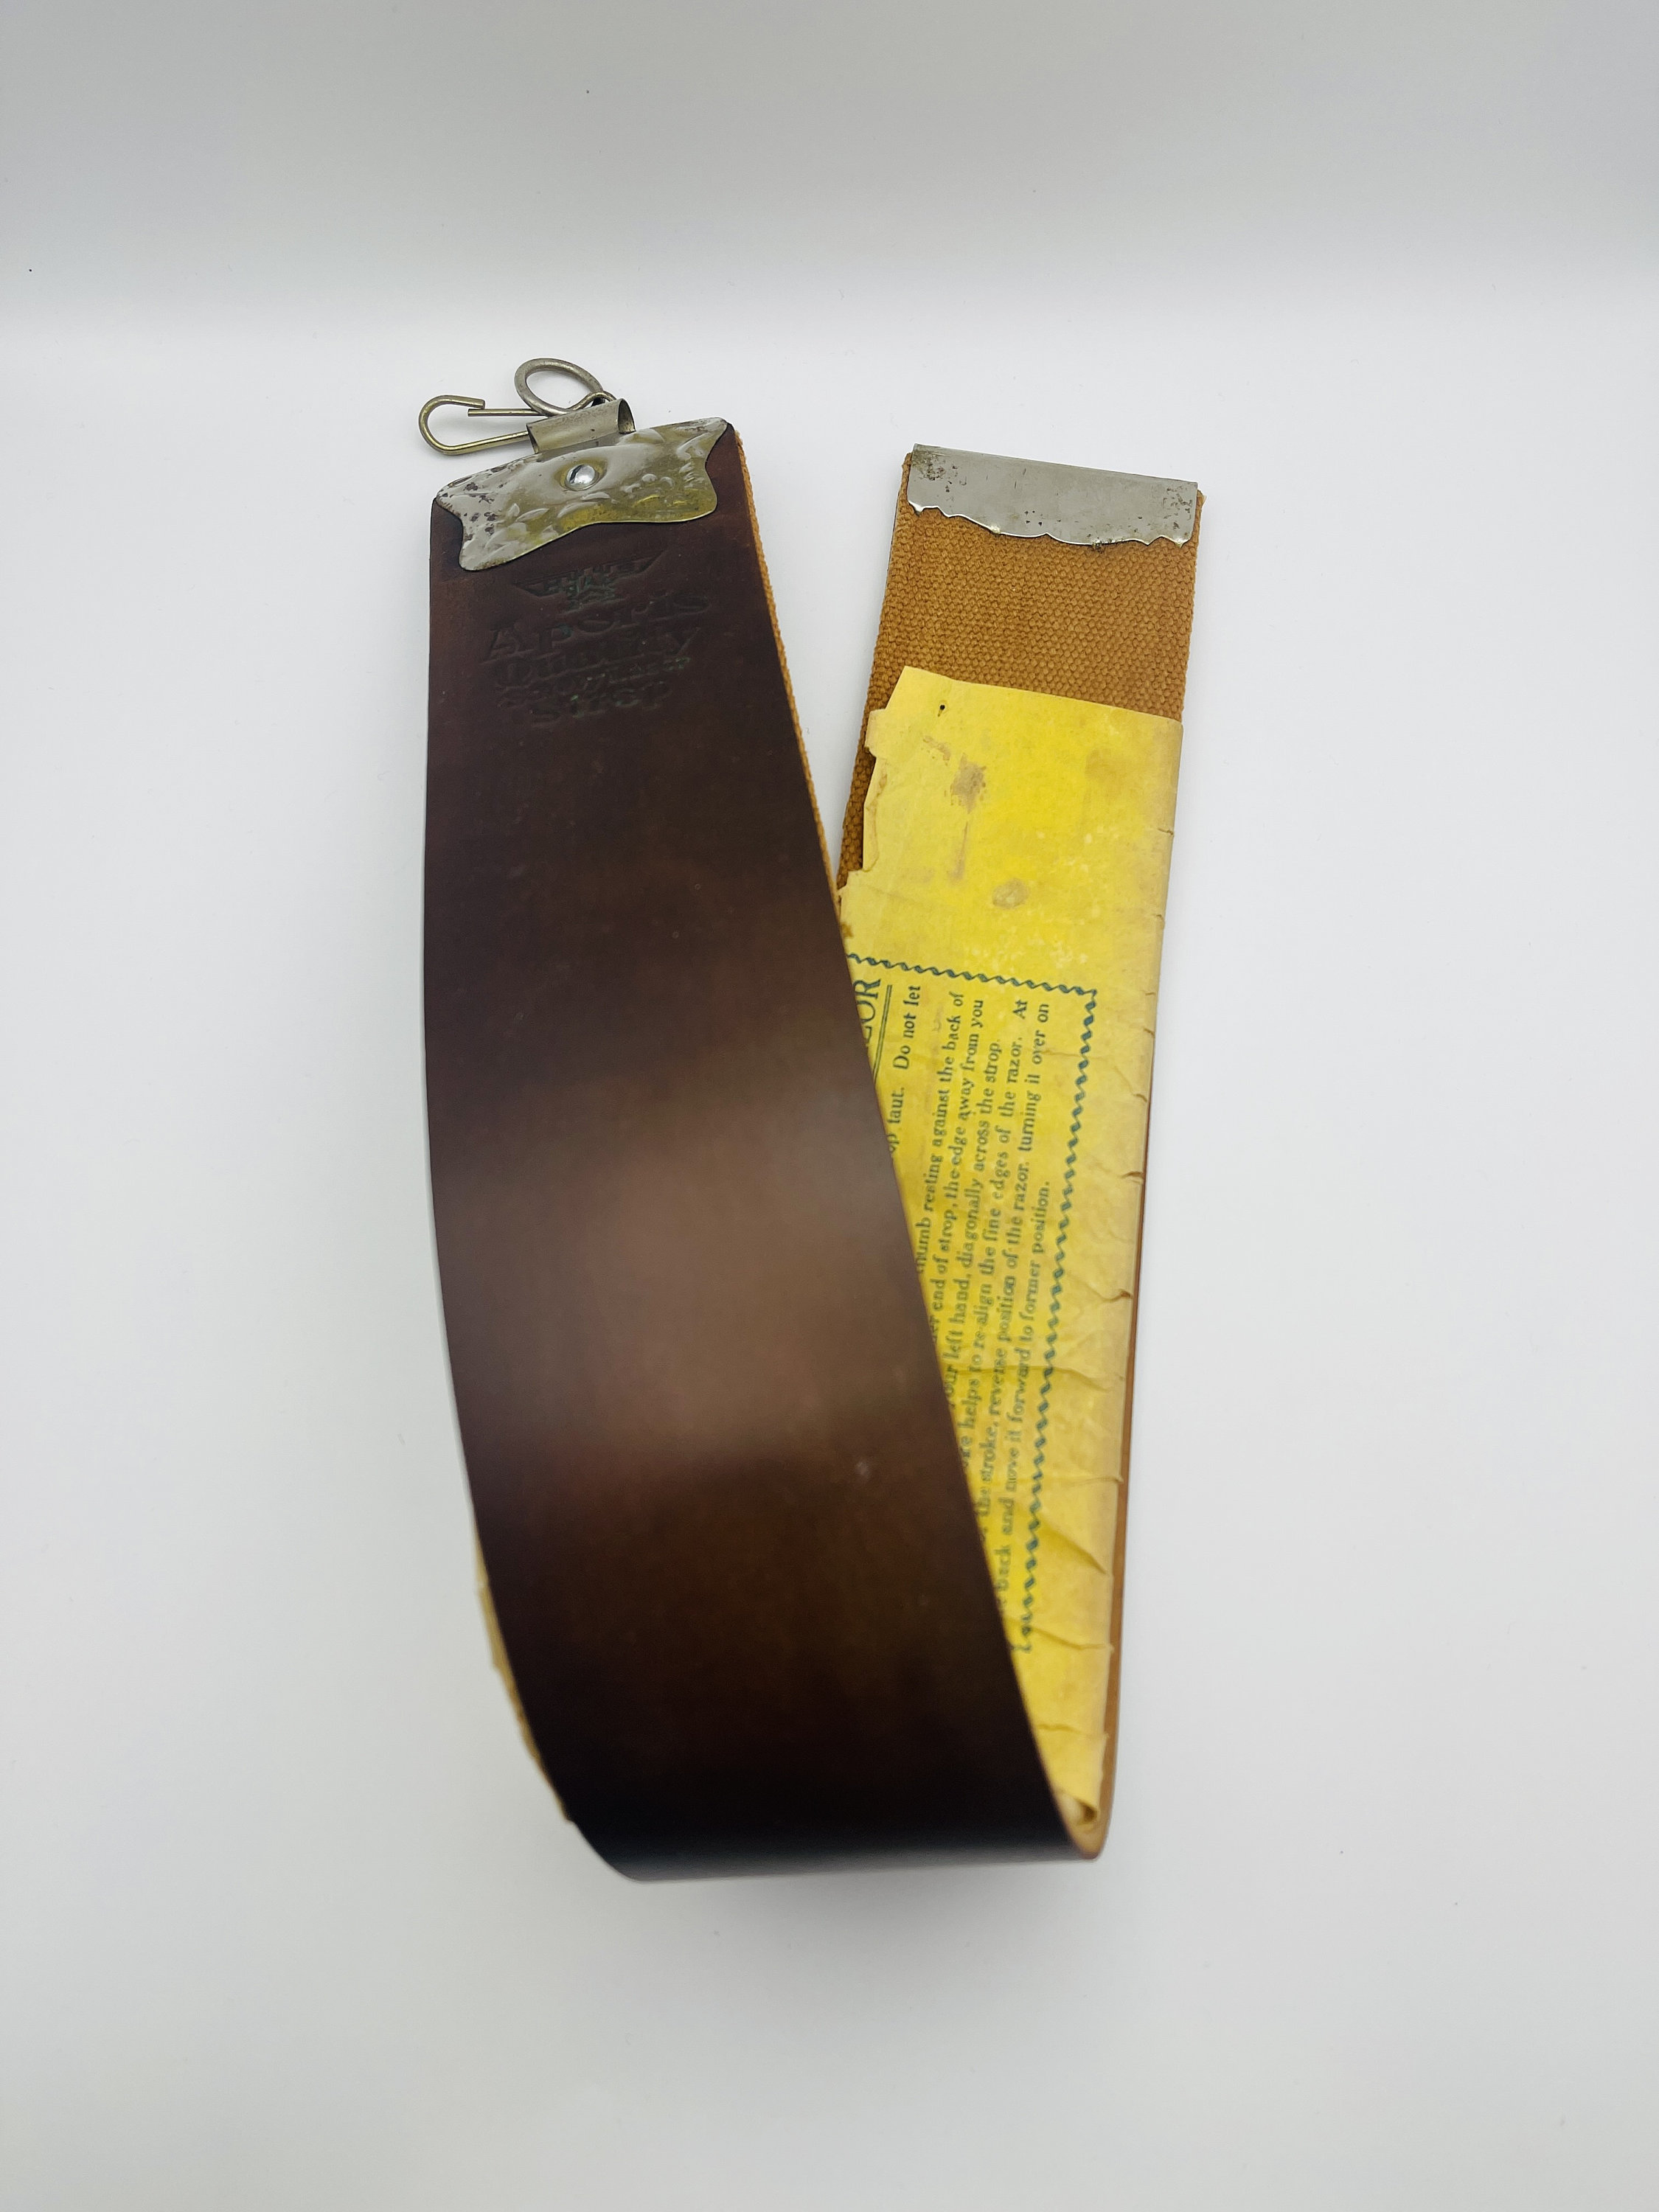 Shell Cordovan Leather Strop [6 x 1] – Gritomatic